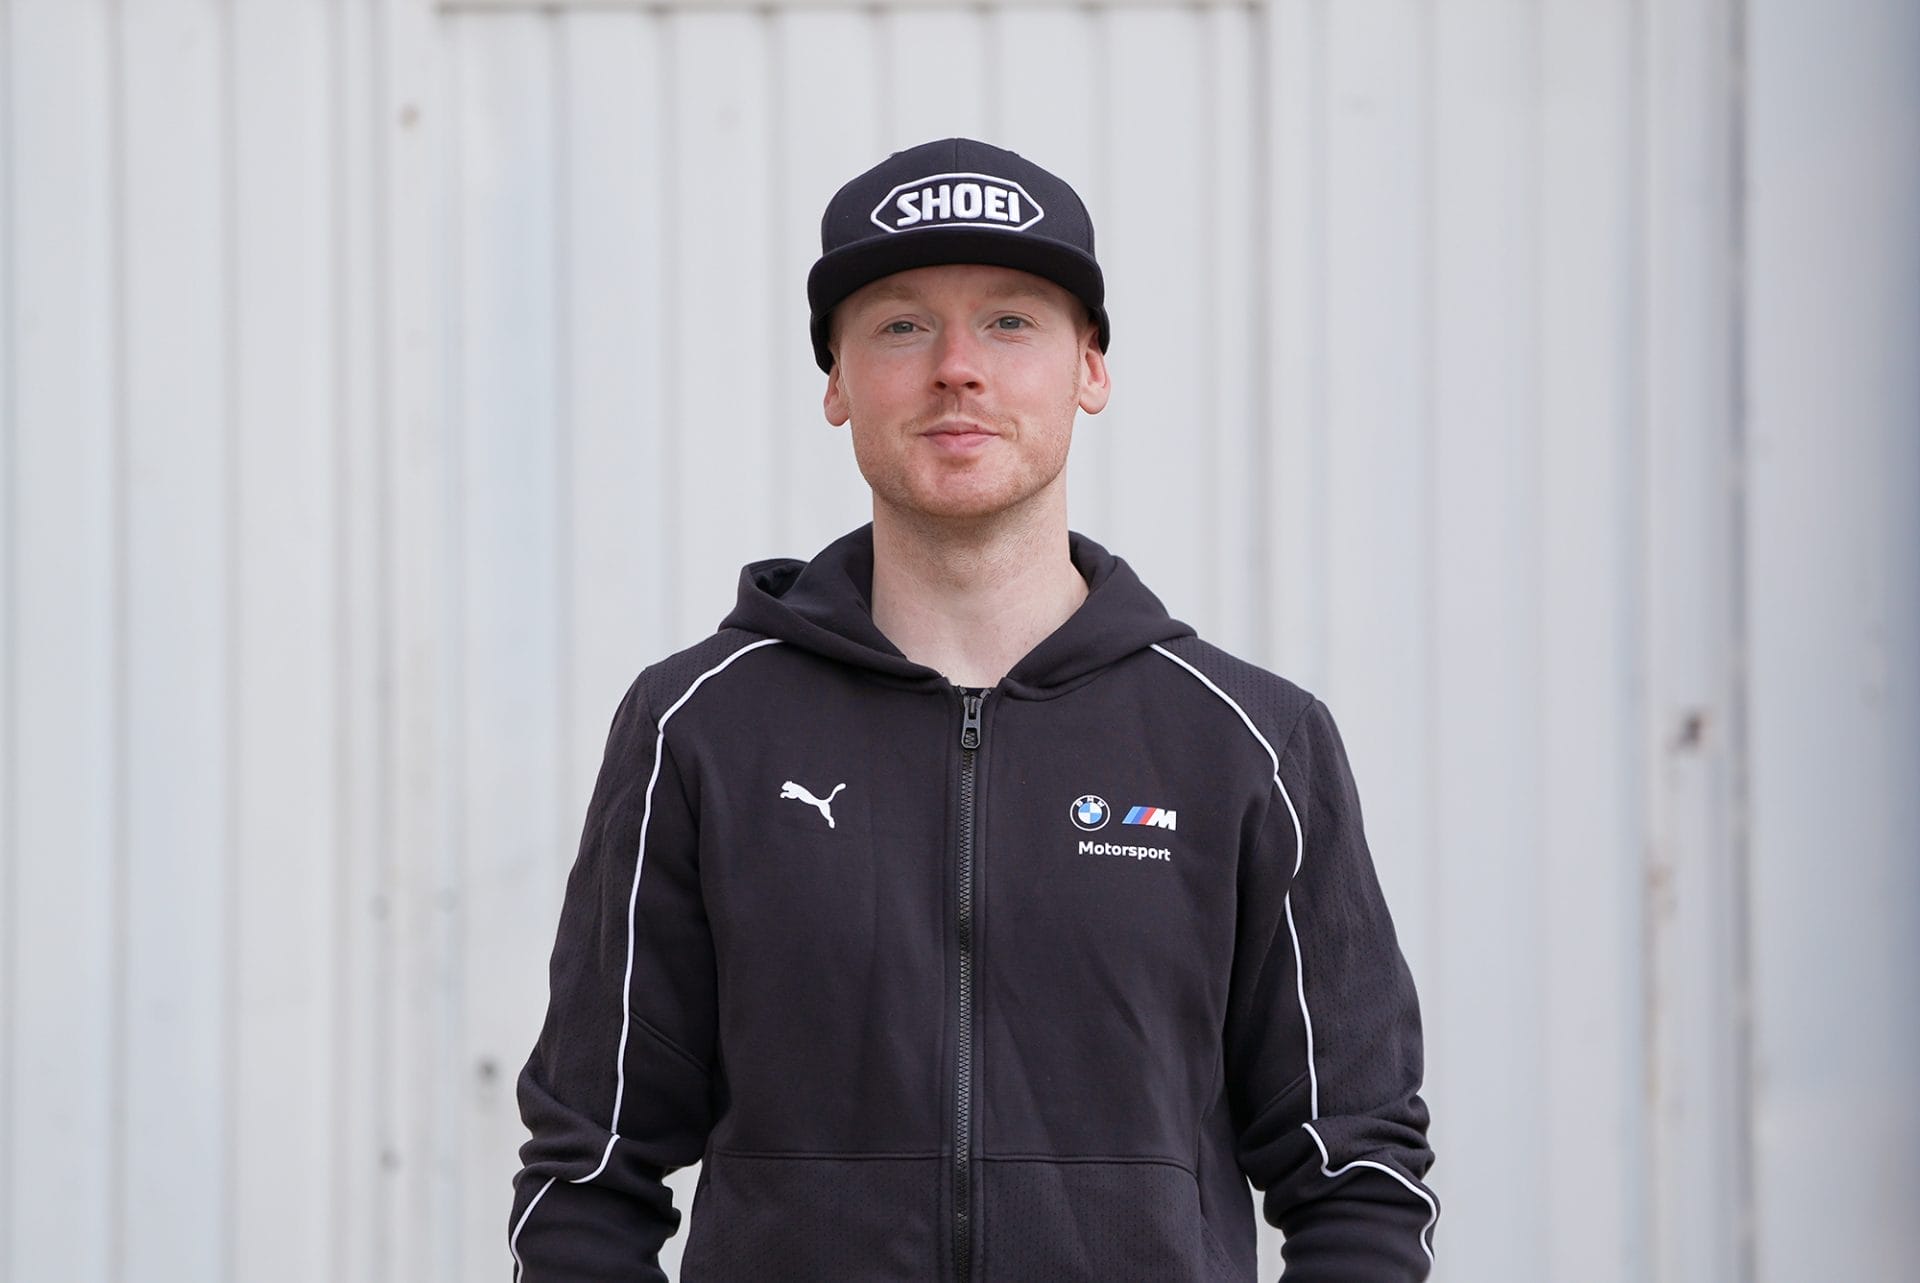 BMW Motorrad Motorsport expands its team: Sylvain Guintoli and Bradley Smith join as test riders